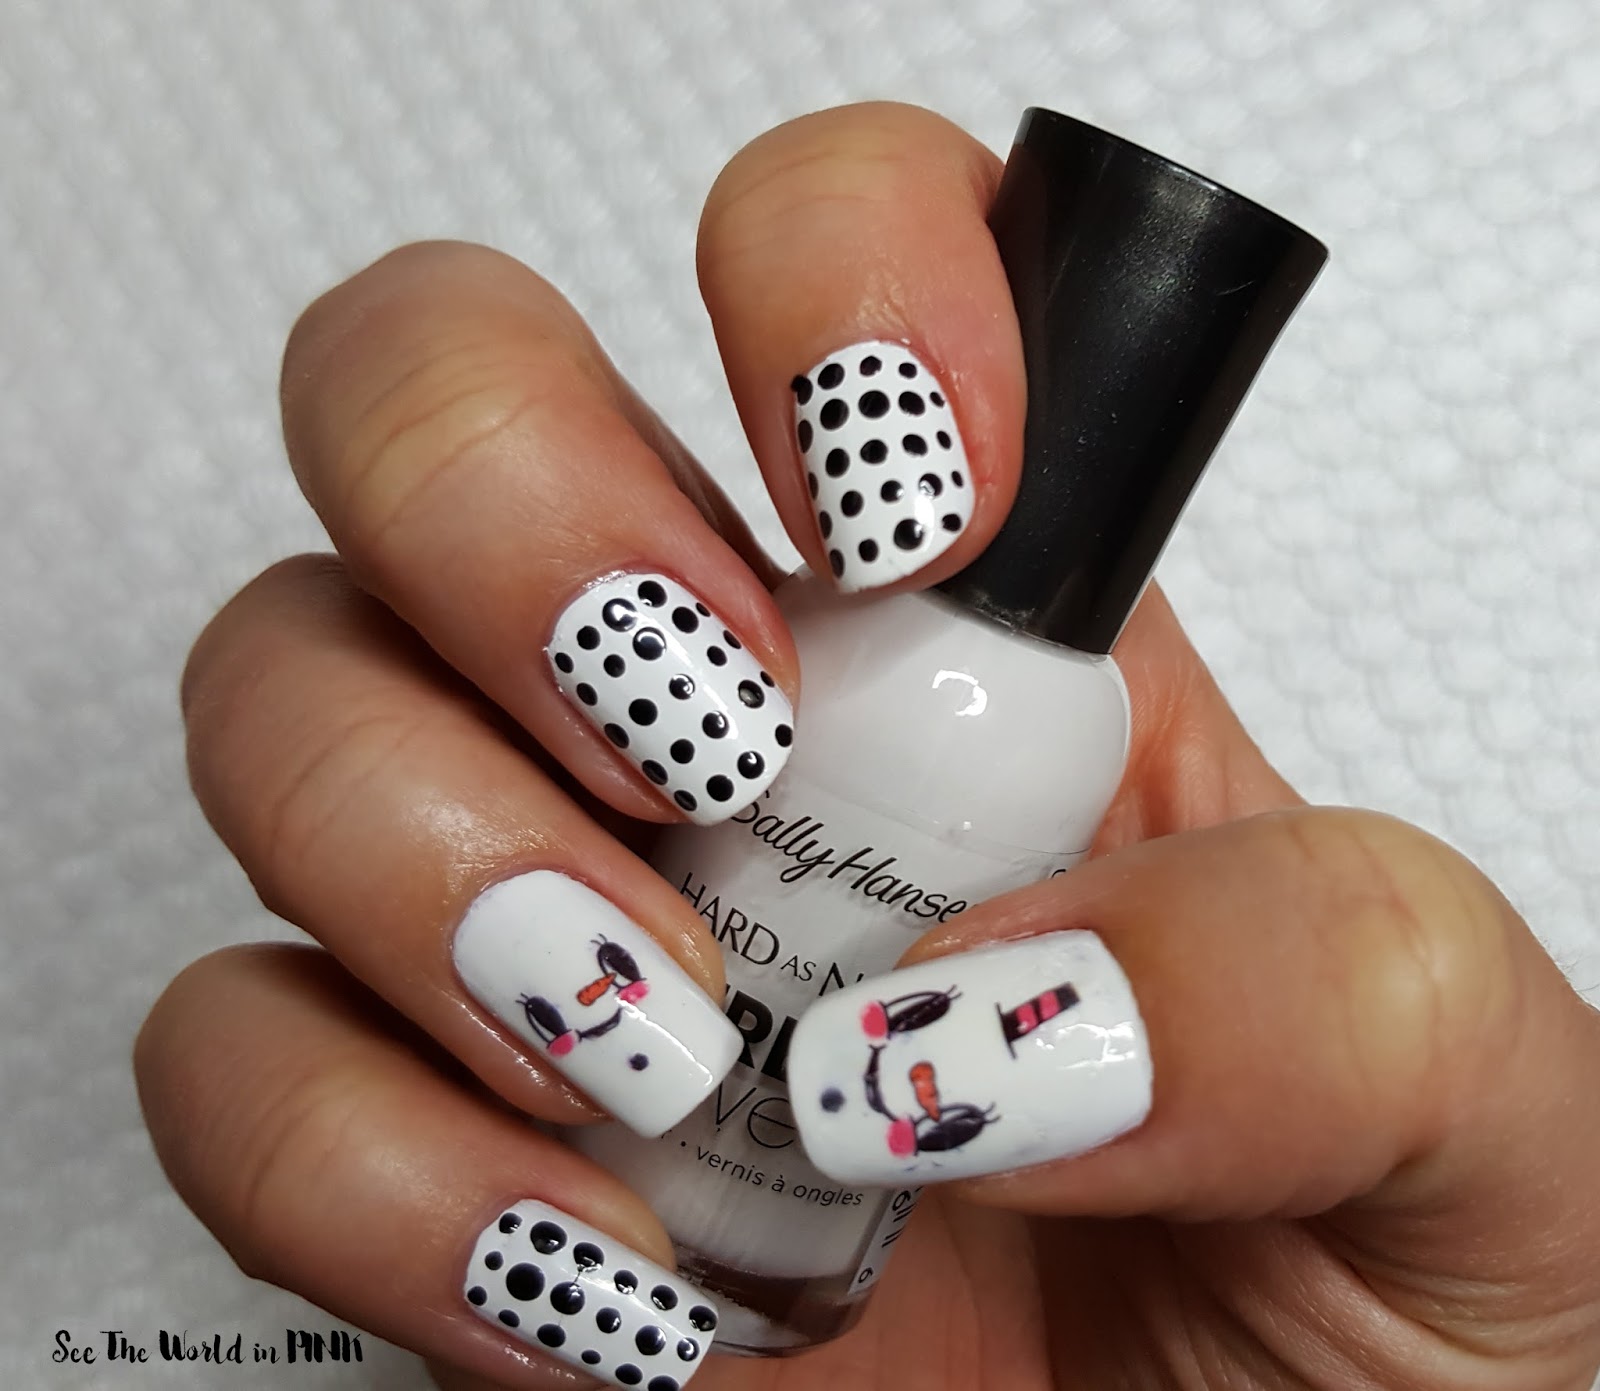 Manicure Monday - Snowman and Polka Dots! 